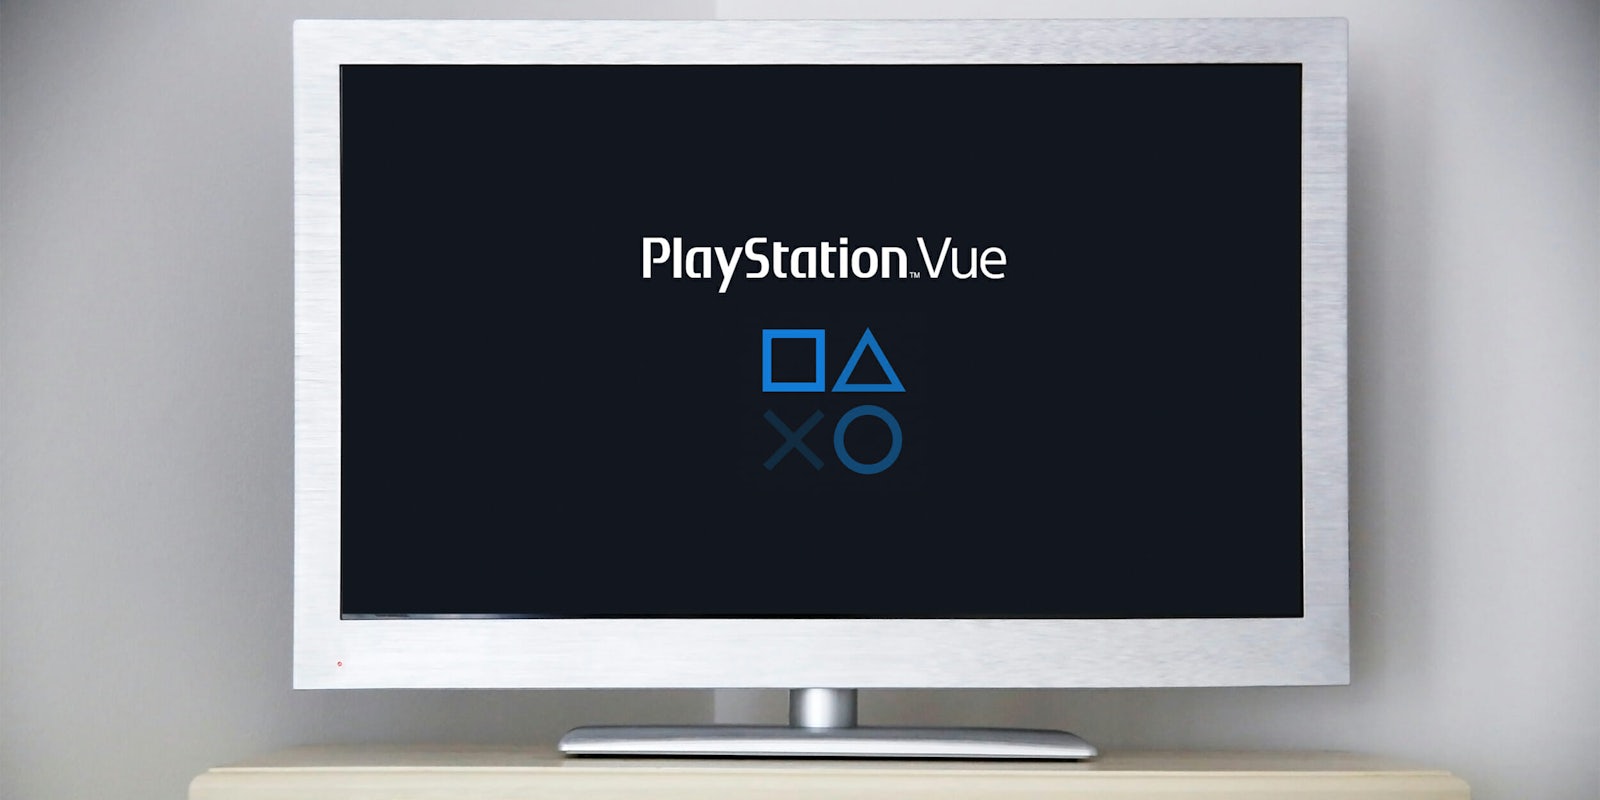 playstation vue devices